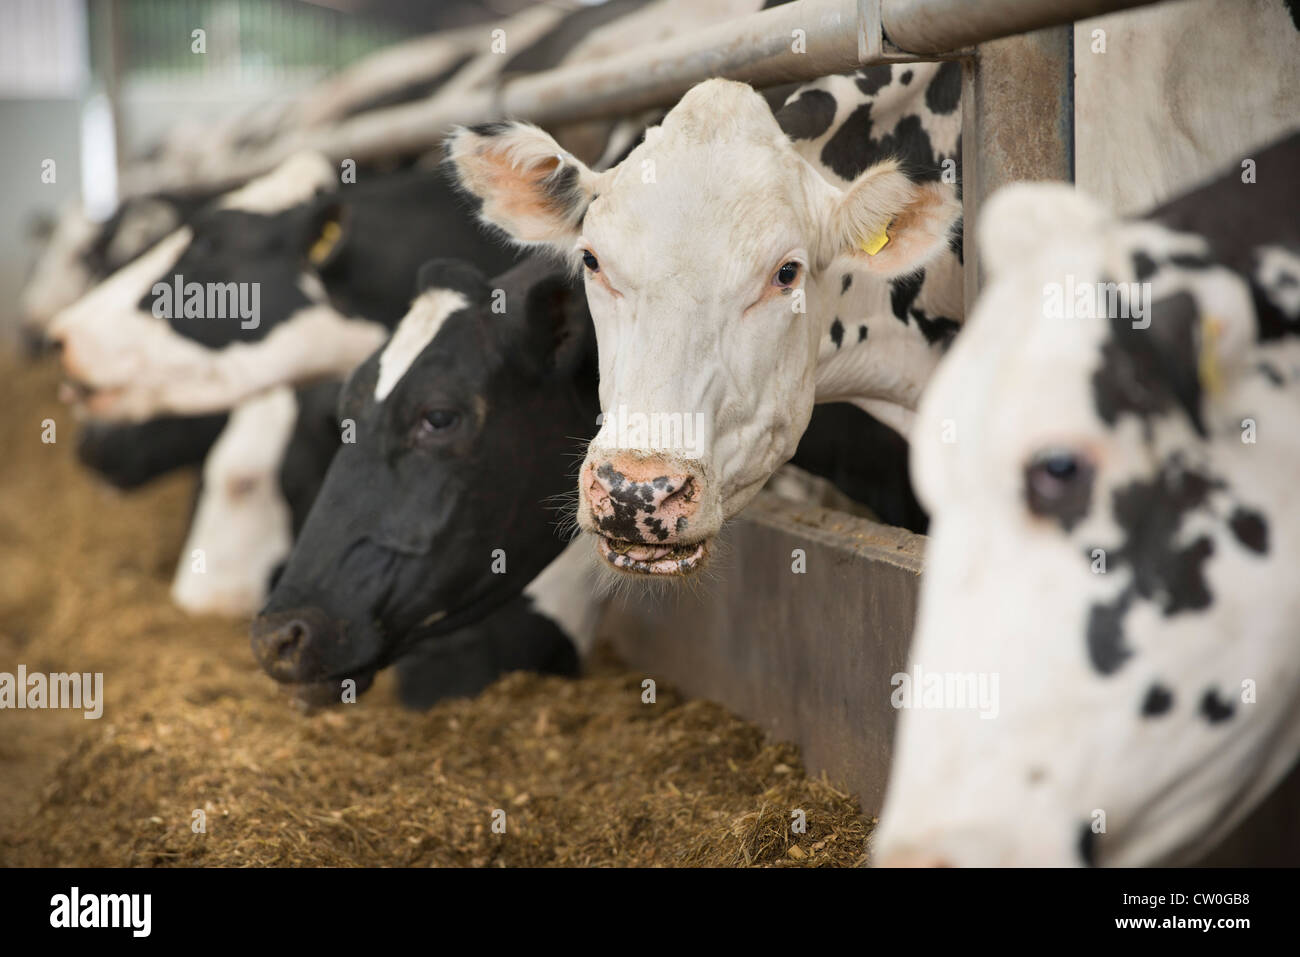 Cows eating hay in barn Stock Photo